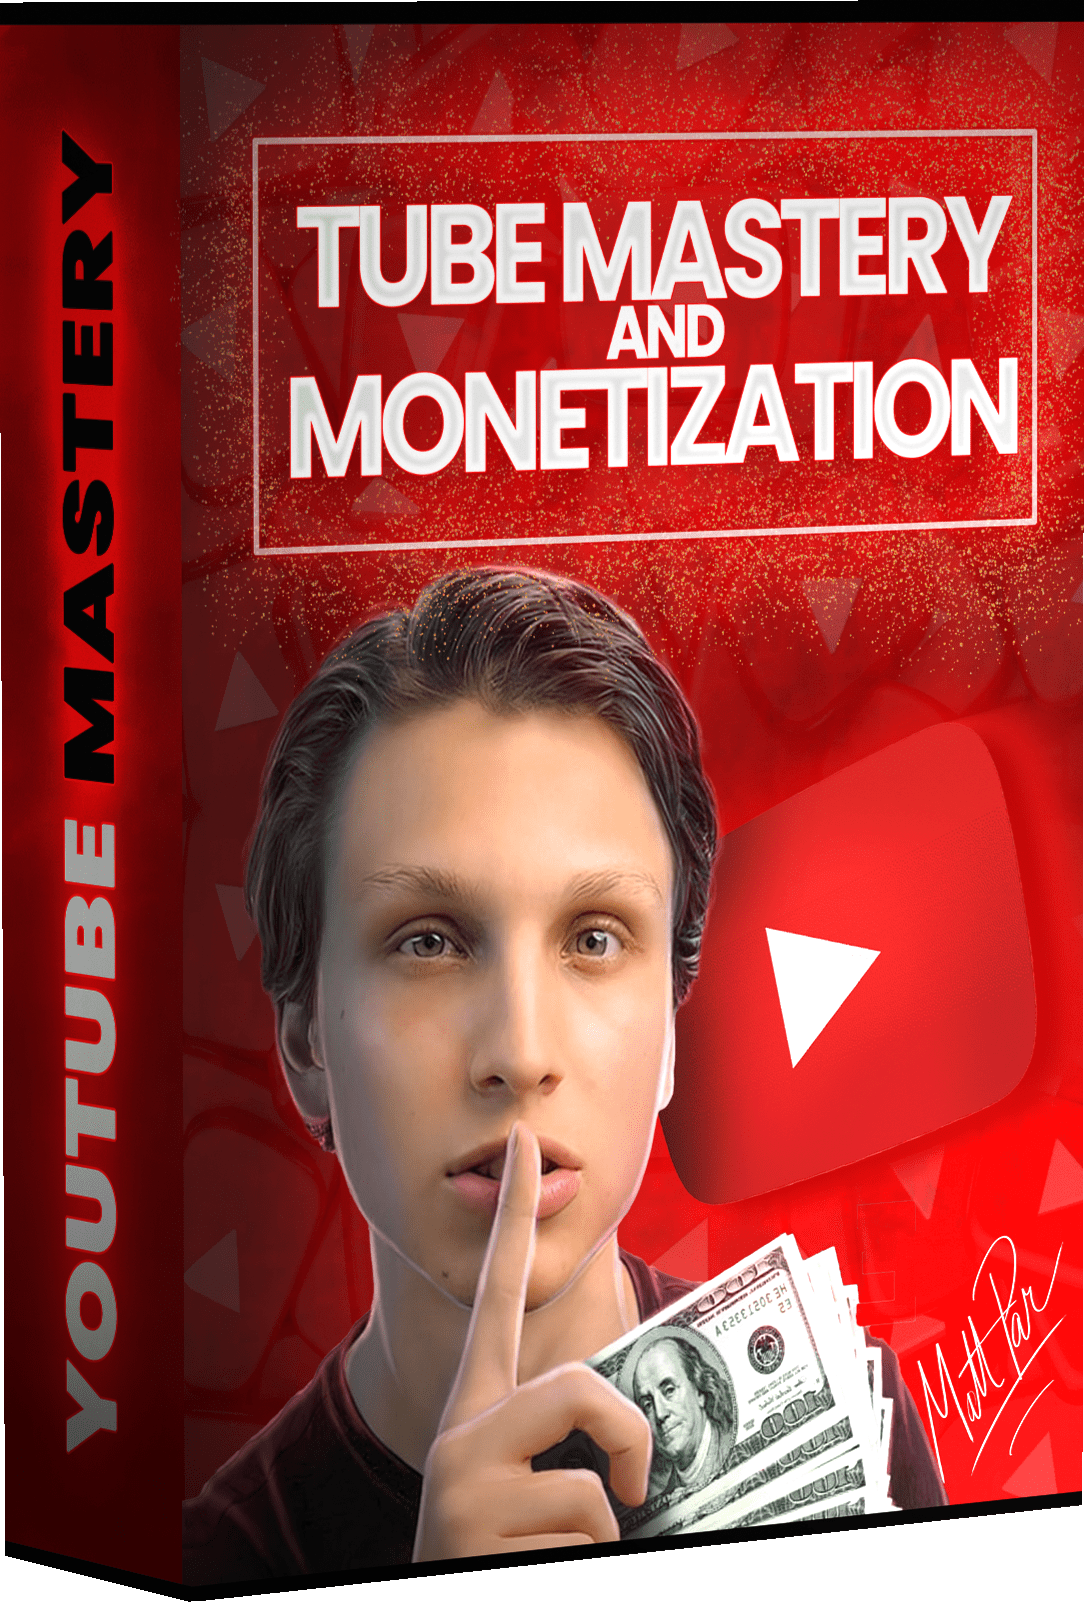 Join Tube Mastery And Monetization 3.0